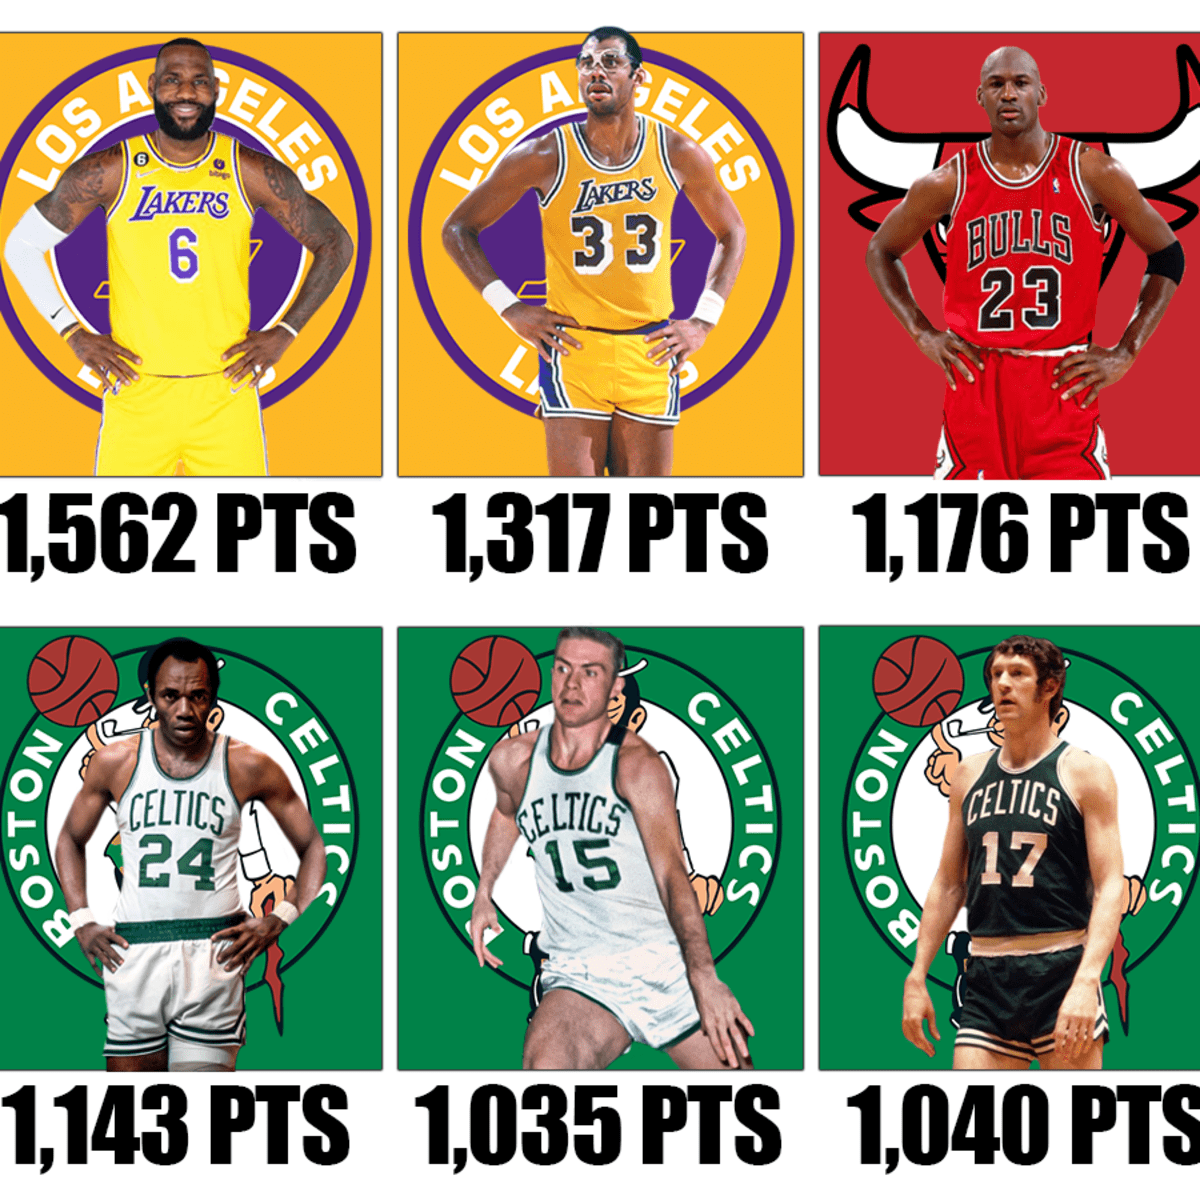 The Total Point Leaders In The NBA Finals From 1991 To 2000: Michael Jordan  Led All The Scorers 6 Times In 6 Finals - Fadeaway World